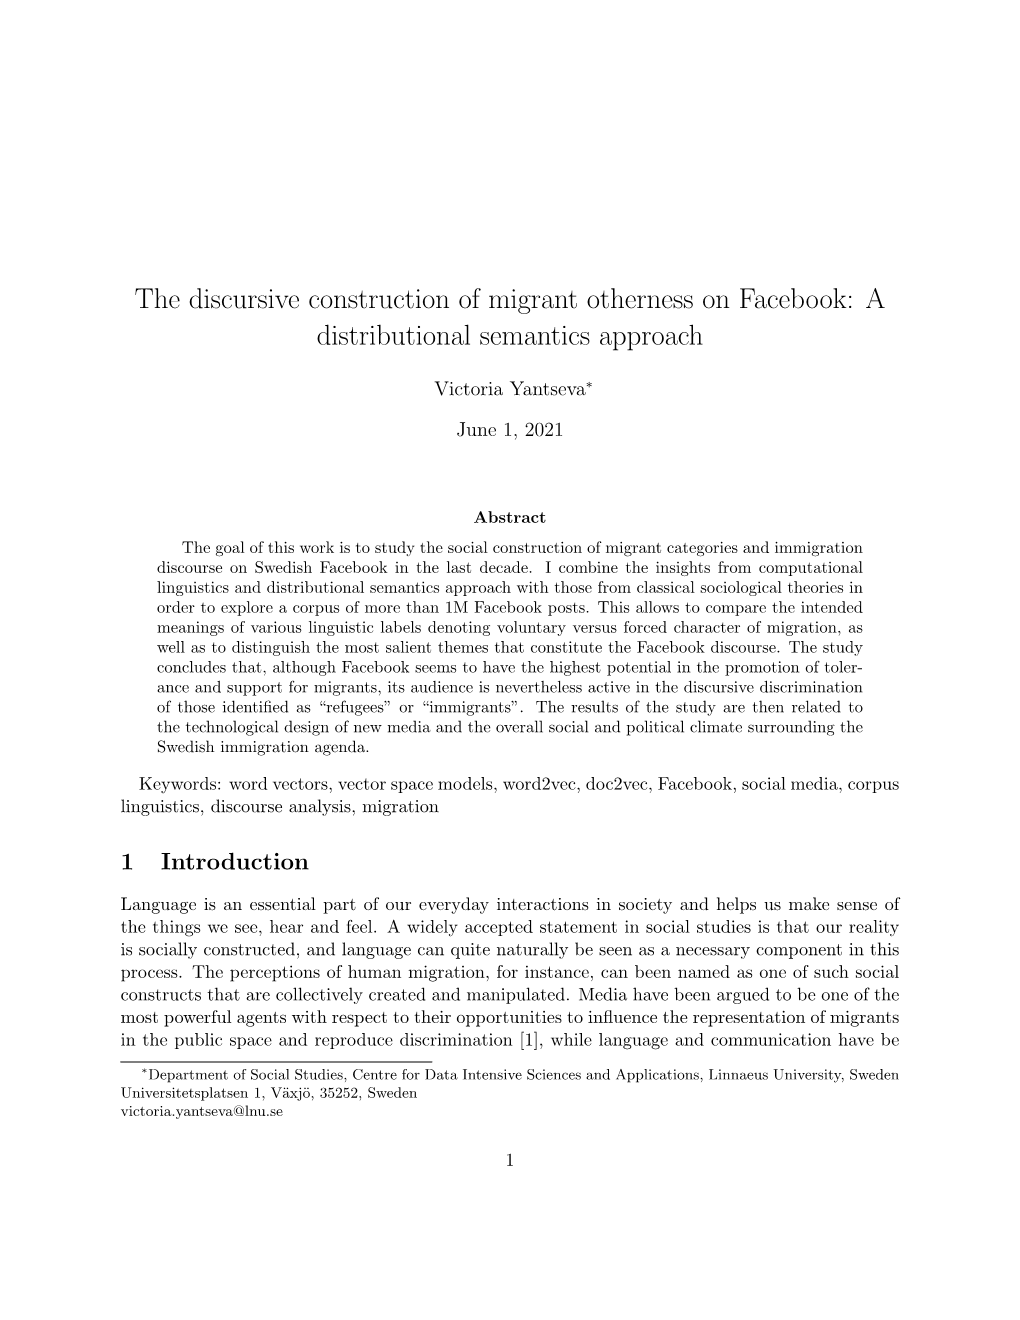 The Discursive Construction of Migrant Otherness on Facebook: a Distributional Semantics Approach